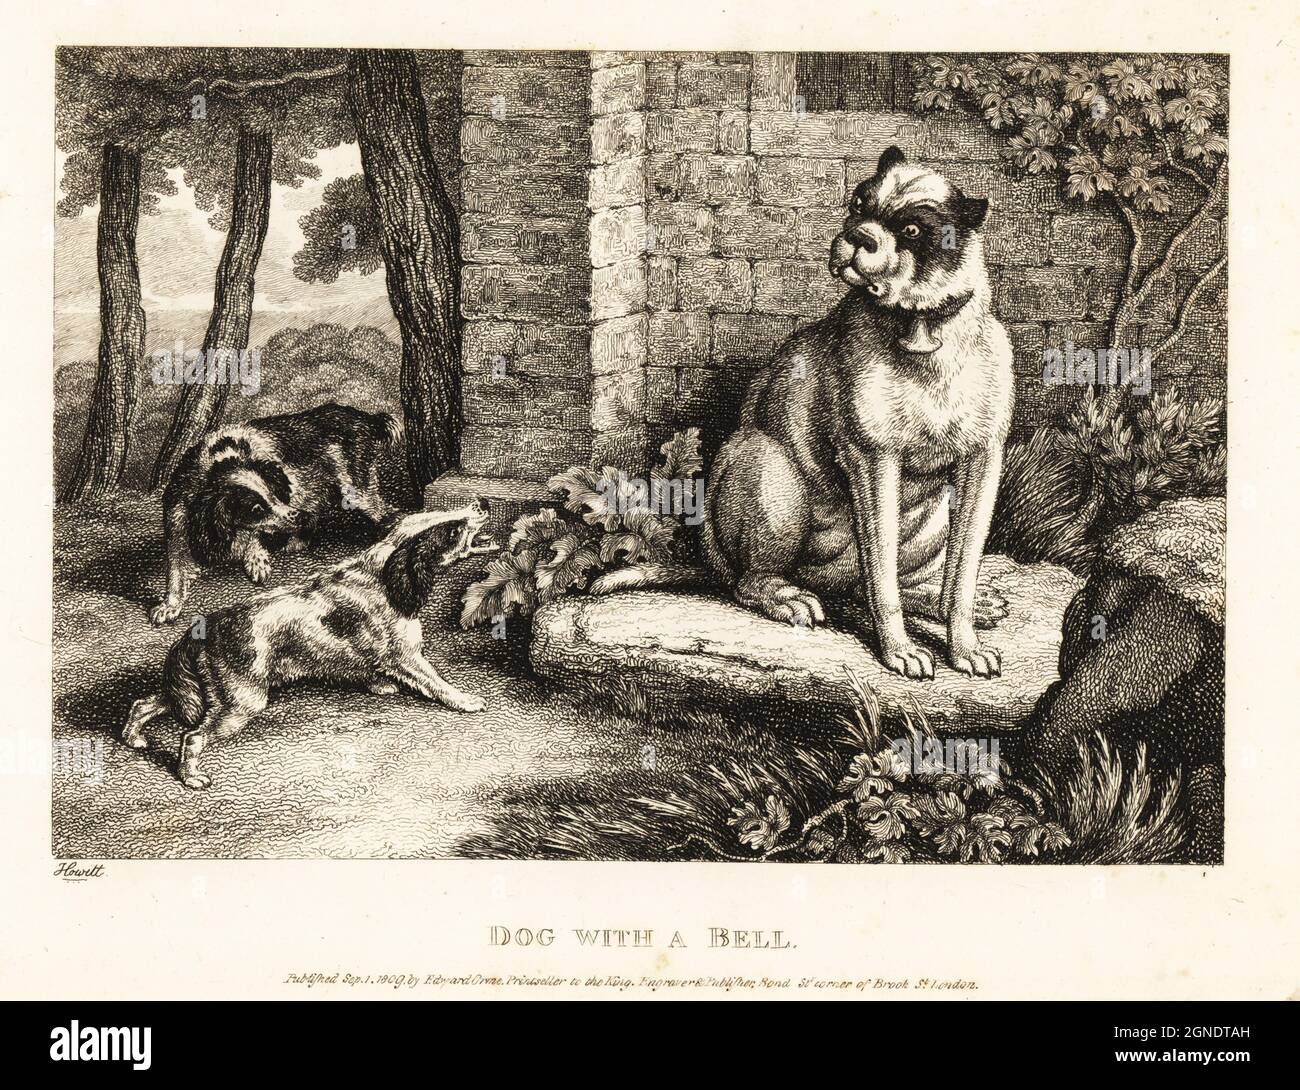 Two spaniels barking at a bulldog with a bell on its collar. Dog with a bell. The mischievous dog. Illustration of a fable by Greek author Aesop. Copperplate etching drawn and engraved from life by Samuel Howitt from his own A New Work of Animals, Principally Designed from the Fables of Aesop, Gay and Phaedrus, Edward Orme, London, 1811. Stock Photo